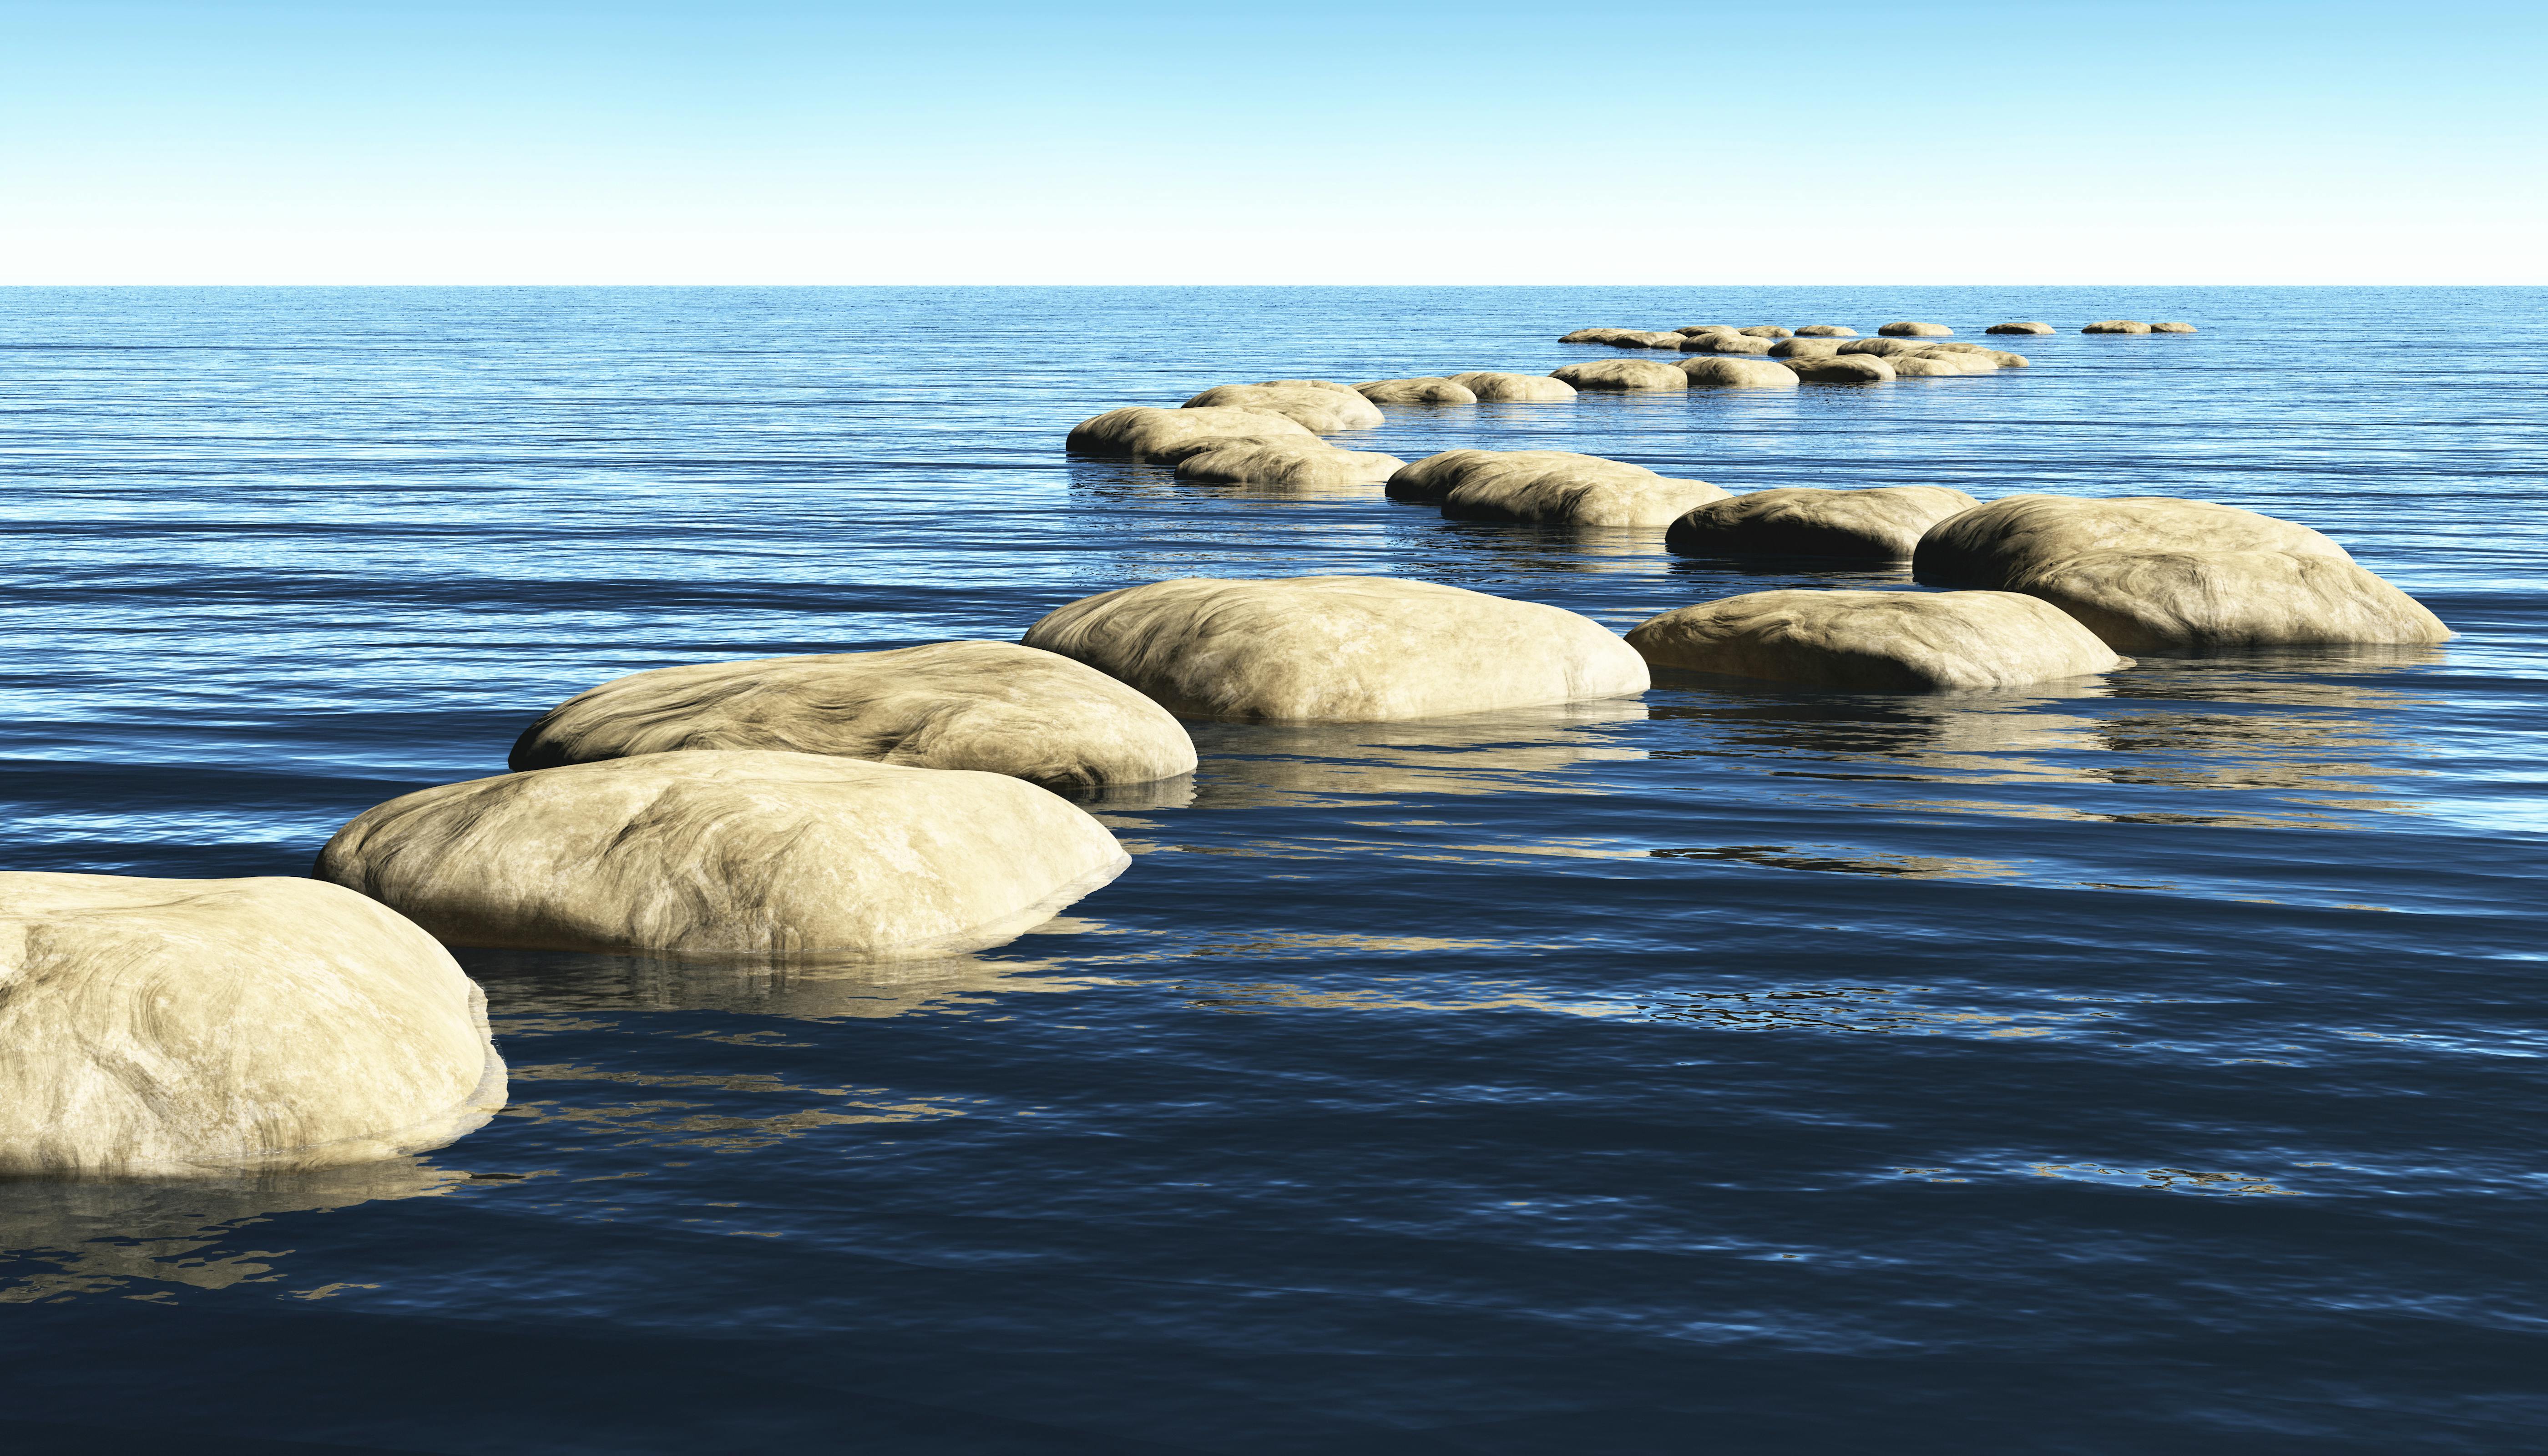 A path made of stones that stay above the surface of deep water and leads toward the horizon